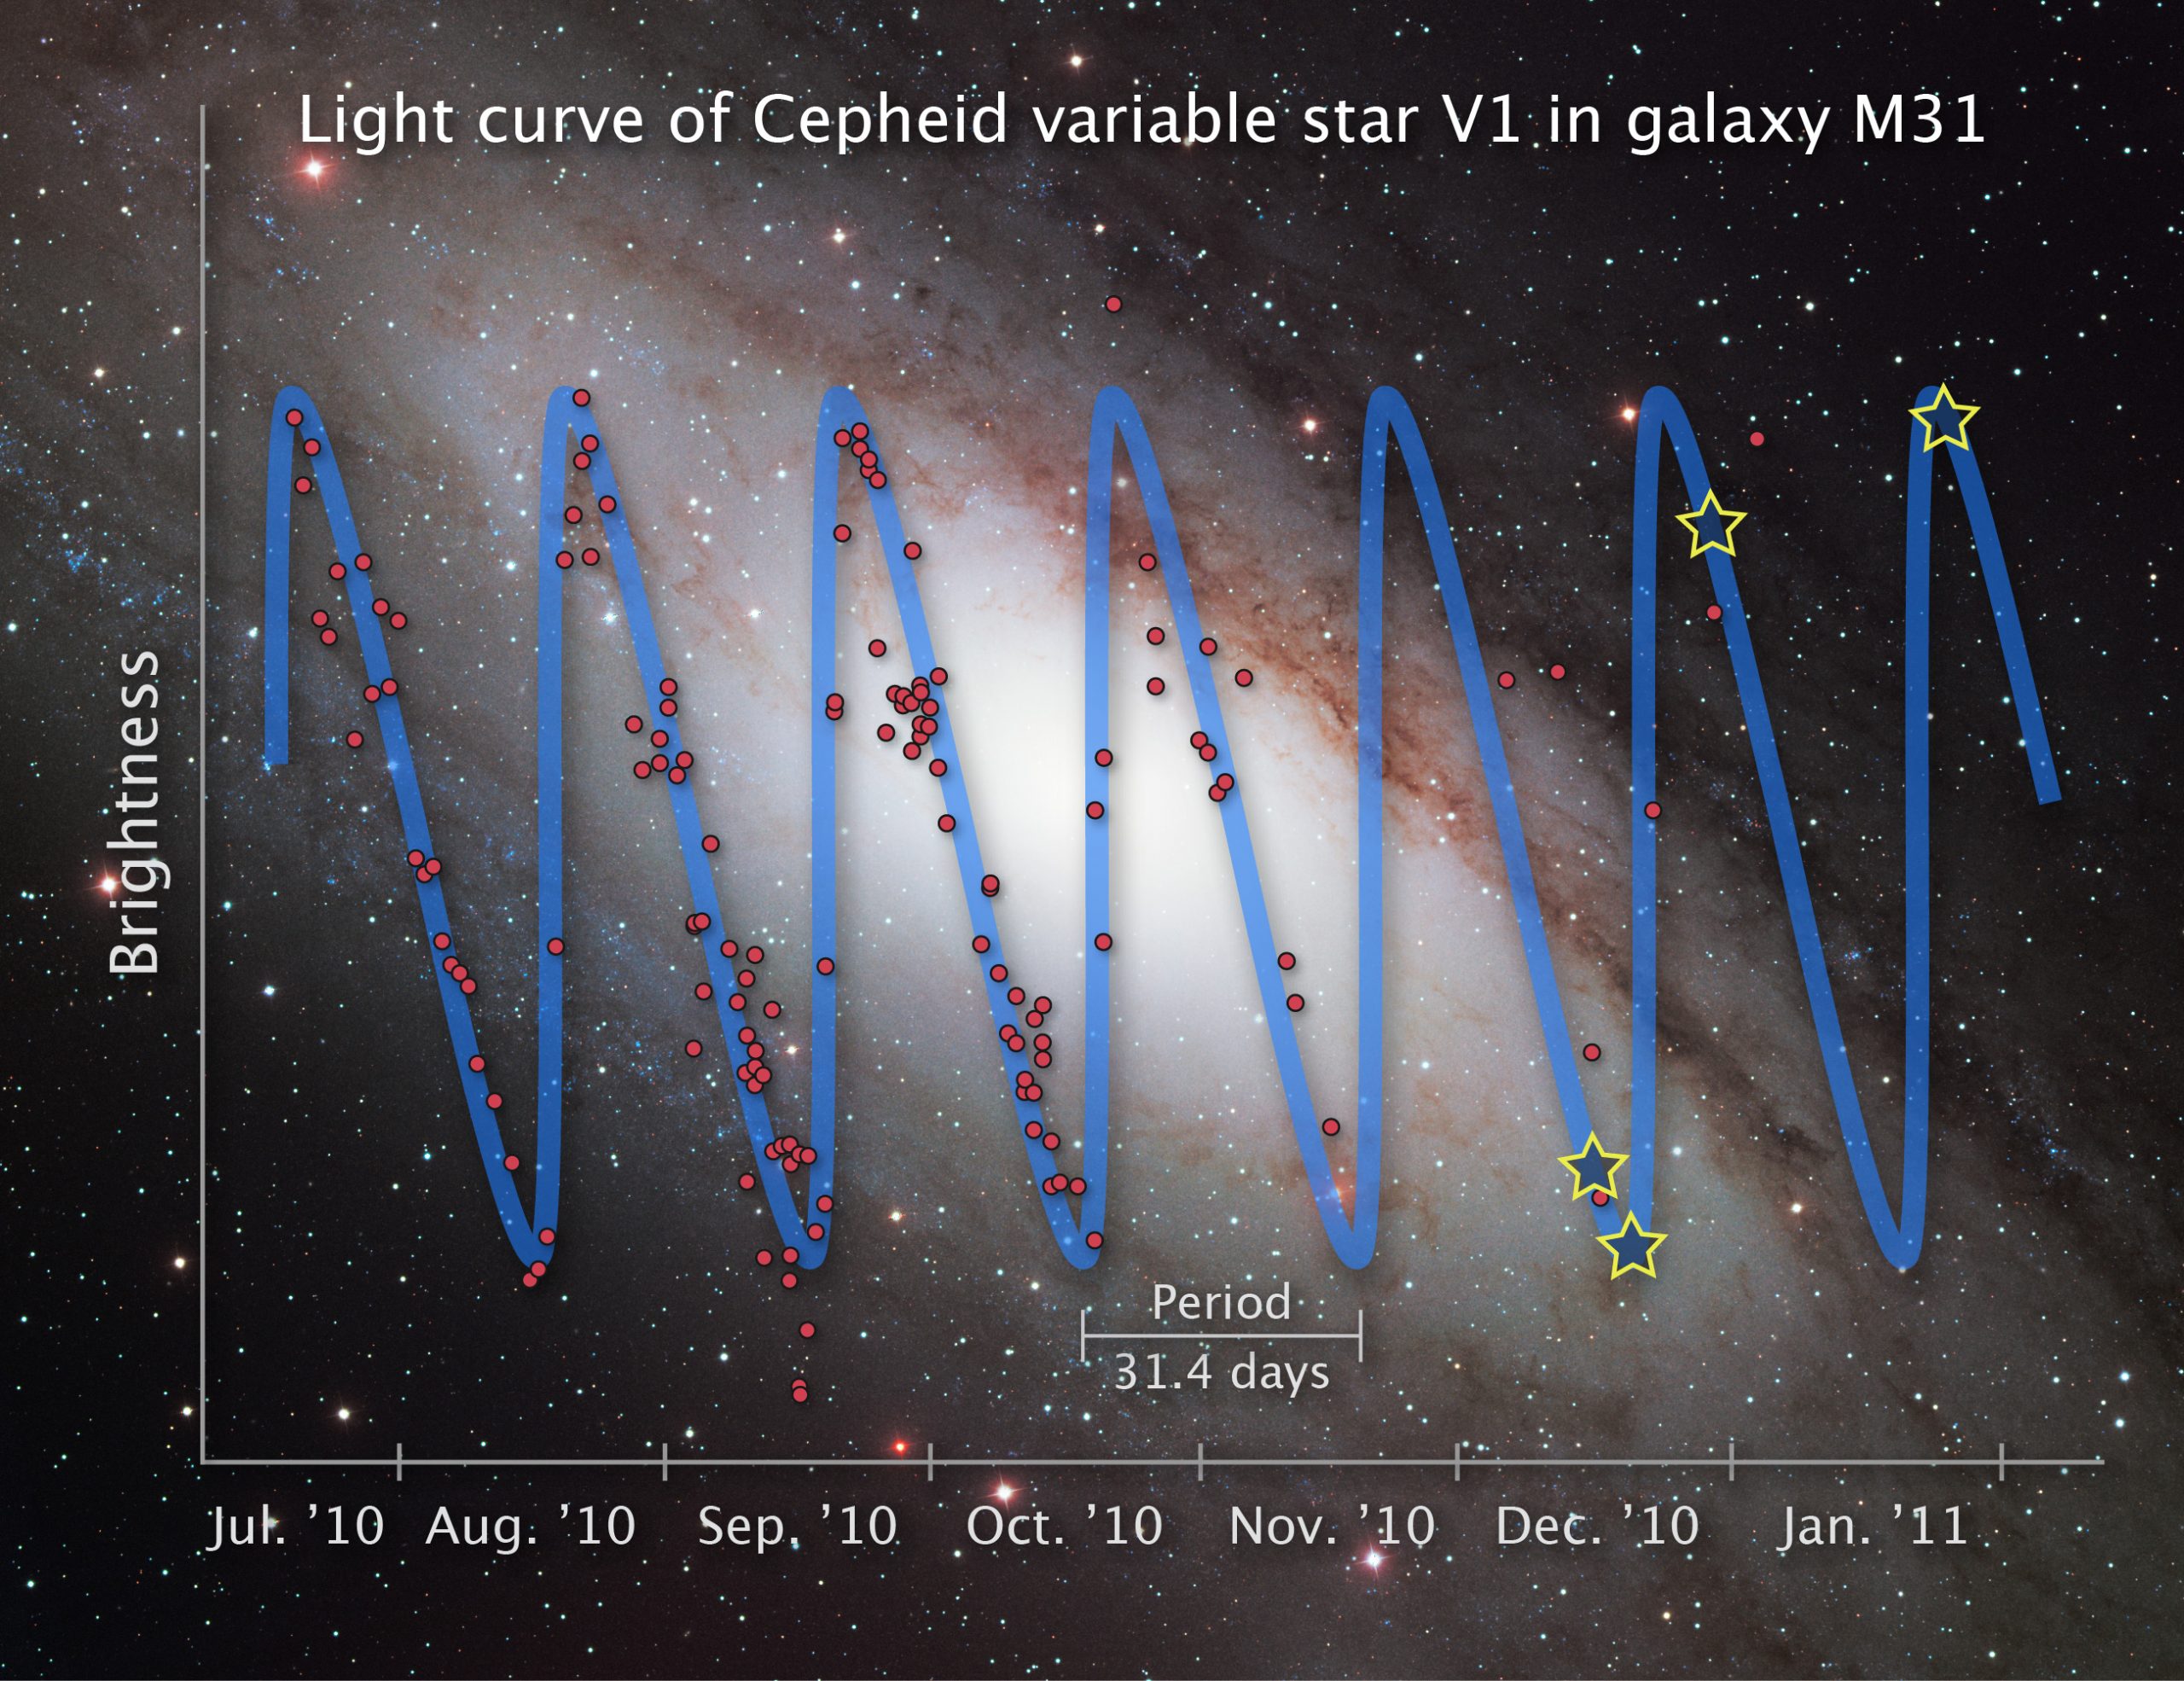 Cepheid light curve, repeating rise and falls in intensity. From Wikicommons.